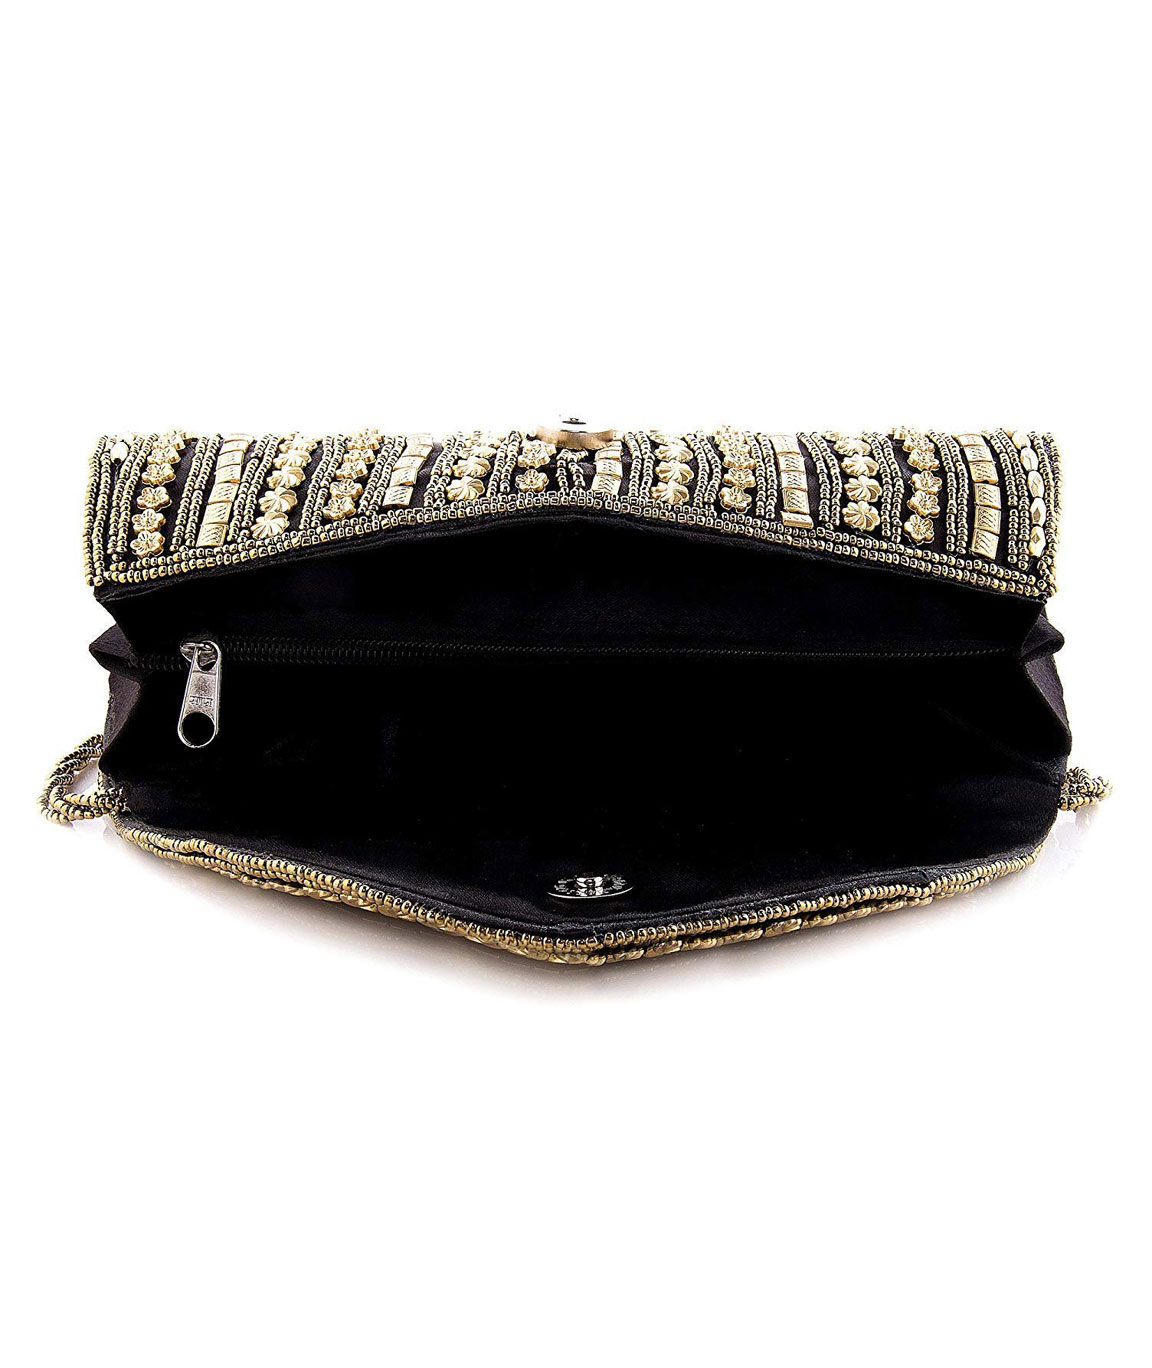 Black Clutch Purse Fashion Hand Purse for Party | Baginning